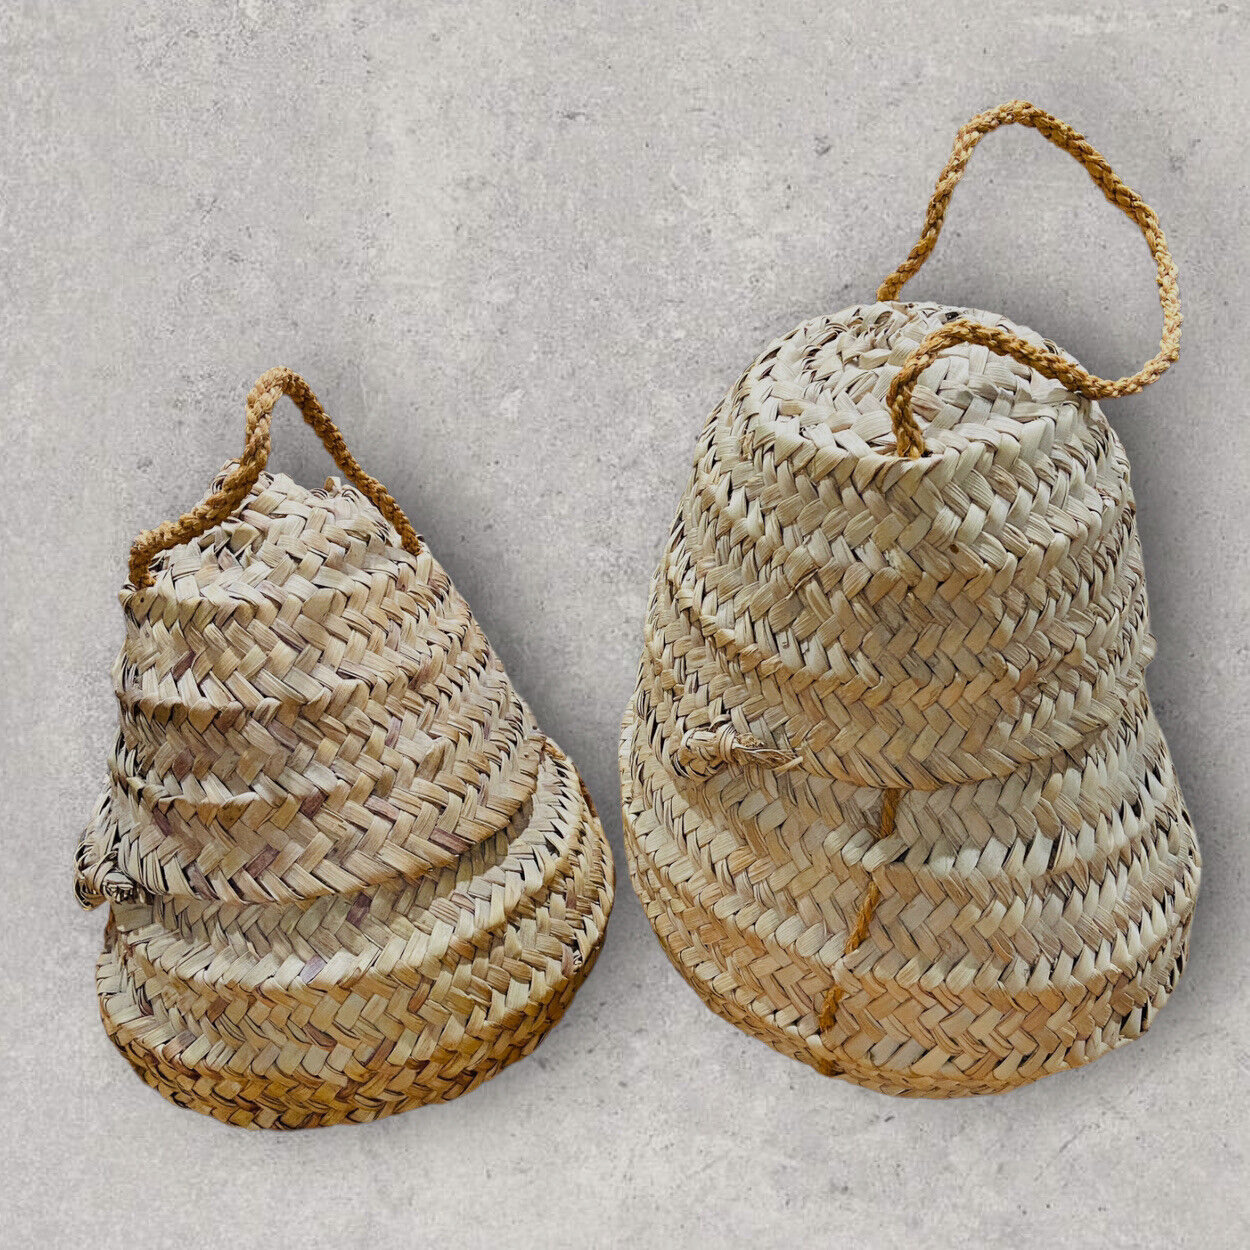 Two Straw Beehive SKEP BeeHive Baskets w/ Handle Woven Decorative Prim Farmhouse